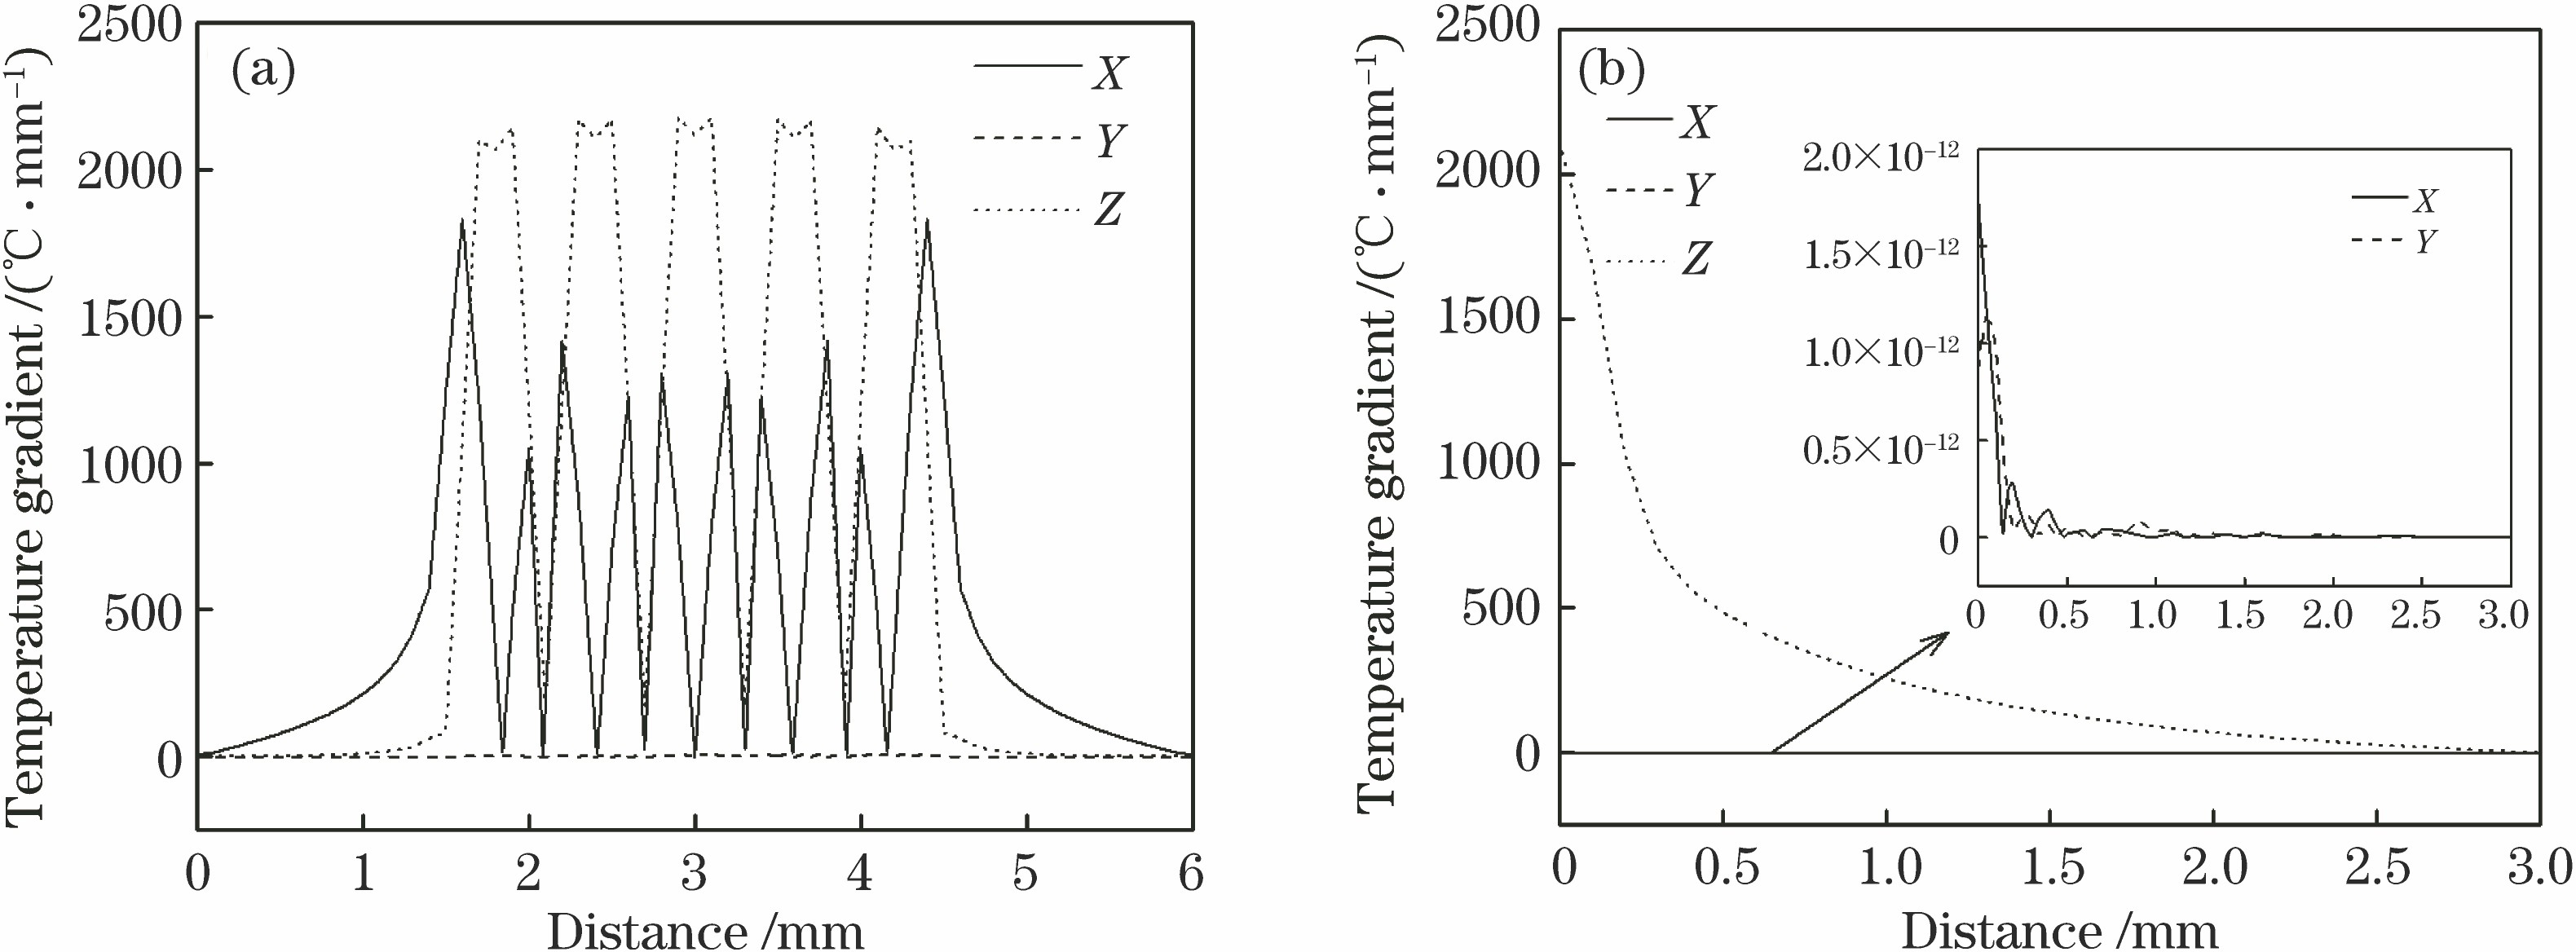 Temperature gradient distributions on two paths. (a) Path 1; (b) path 2